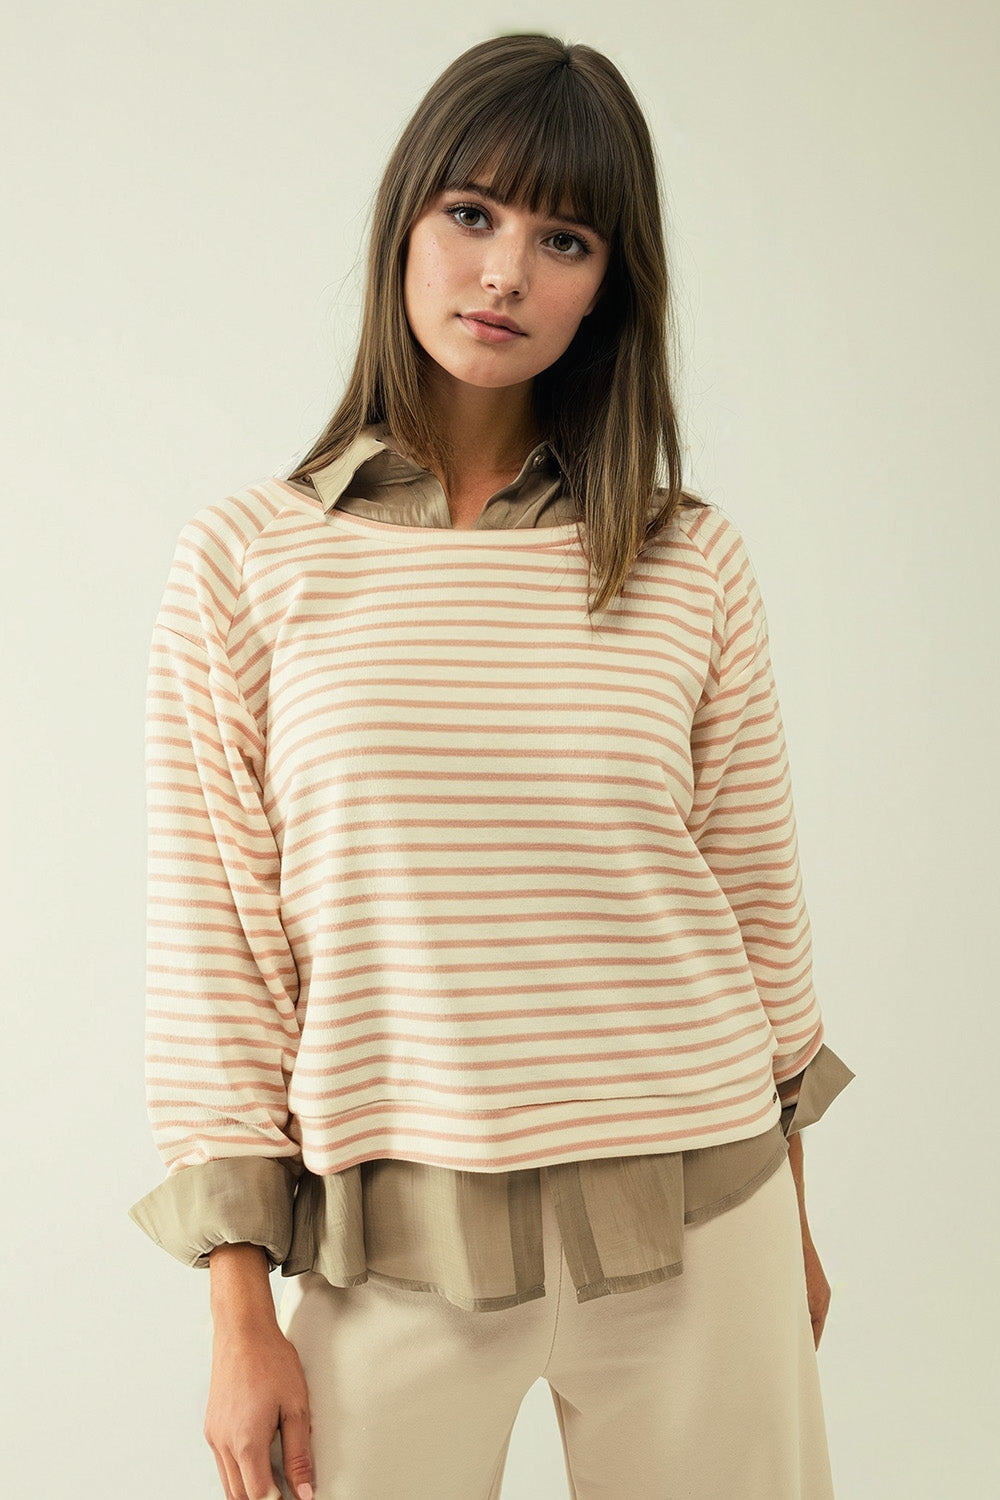 Q2 Long sleeves white sweater with pink stripes and a boat neck